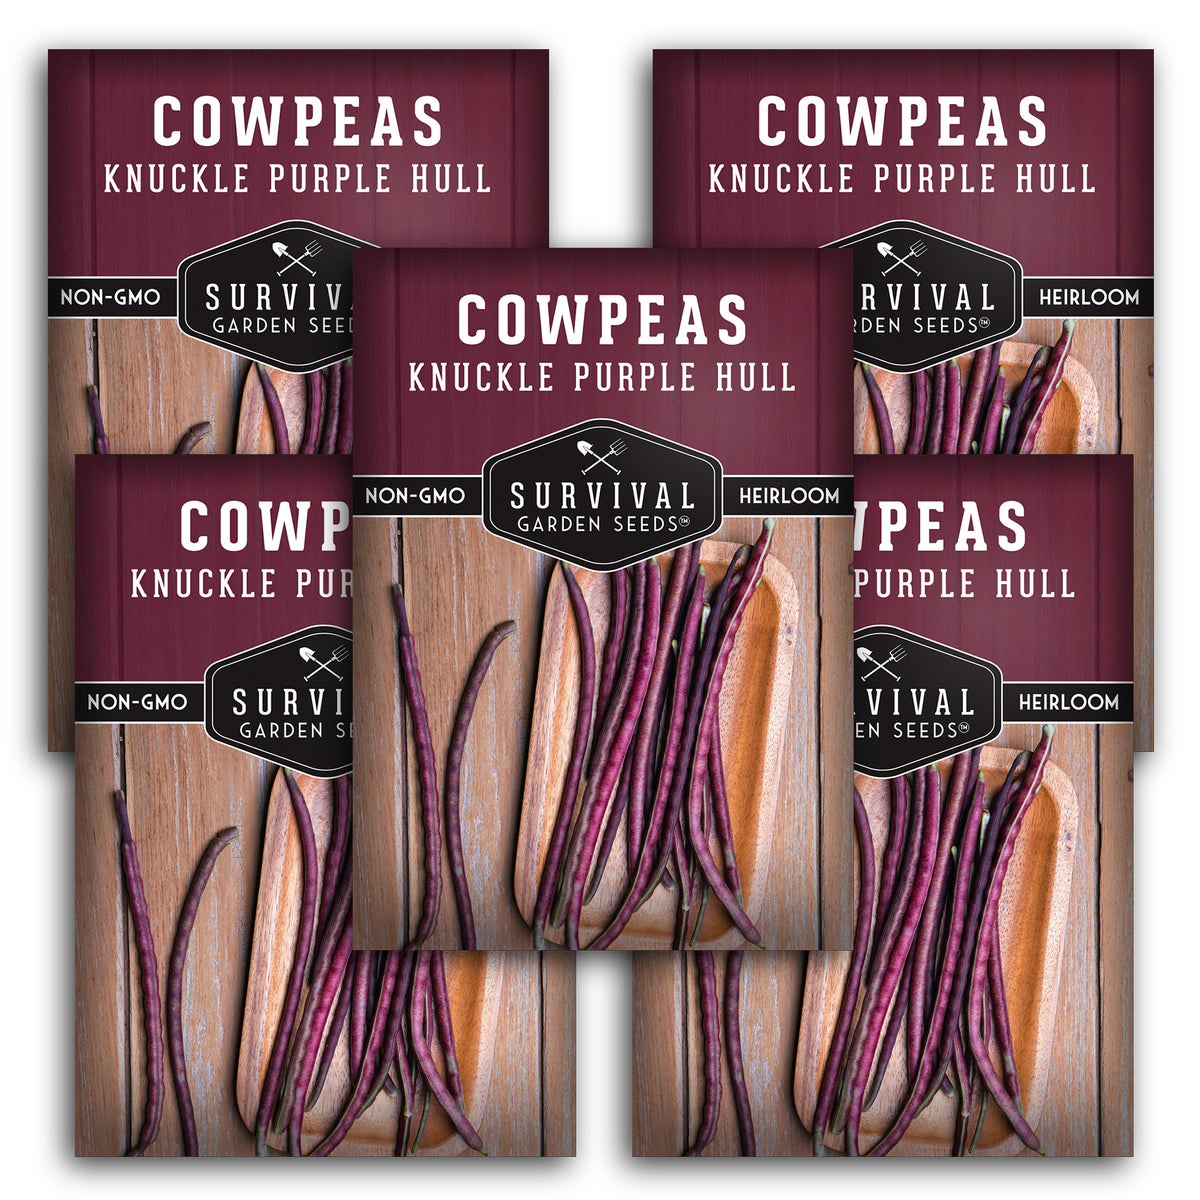 5 packets of Knuckle Purple Hull Cowpeas